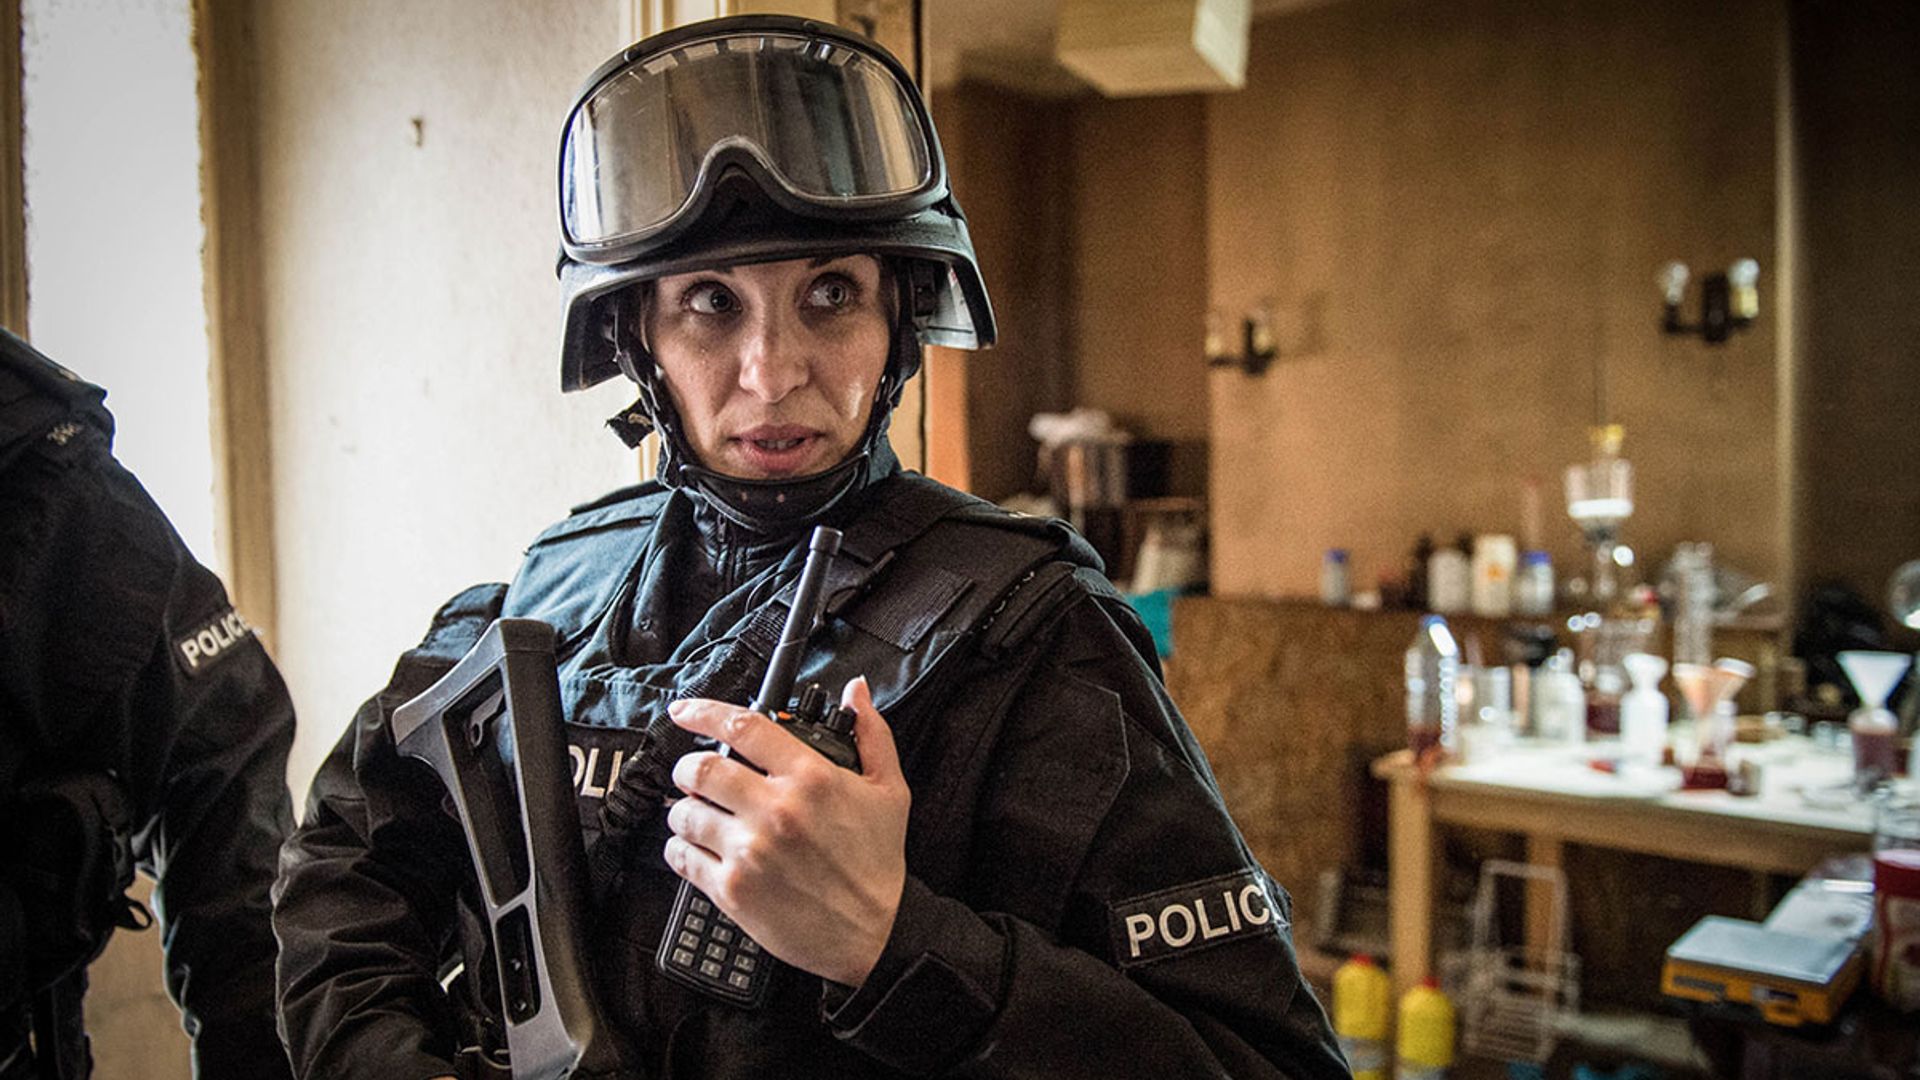 Line of Duty star Vicky McClure's latest drama revealed - and it sounds intense